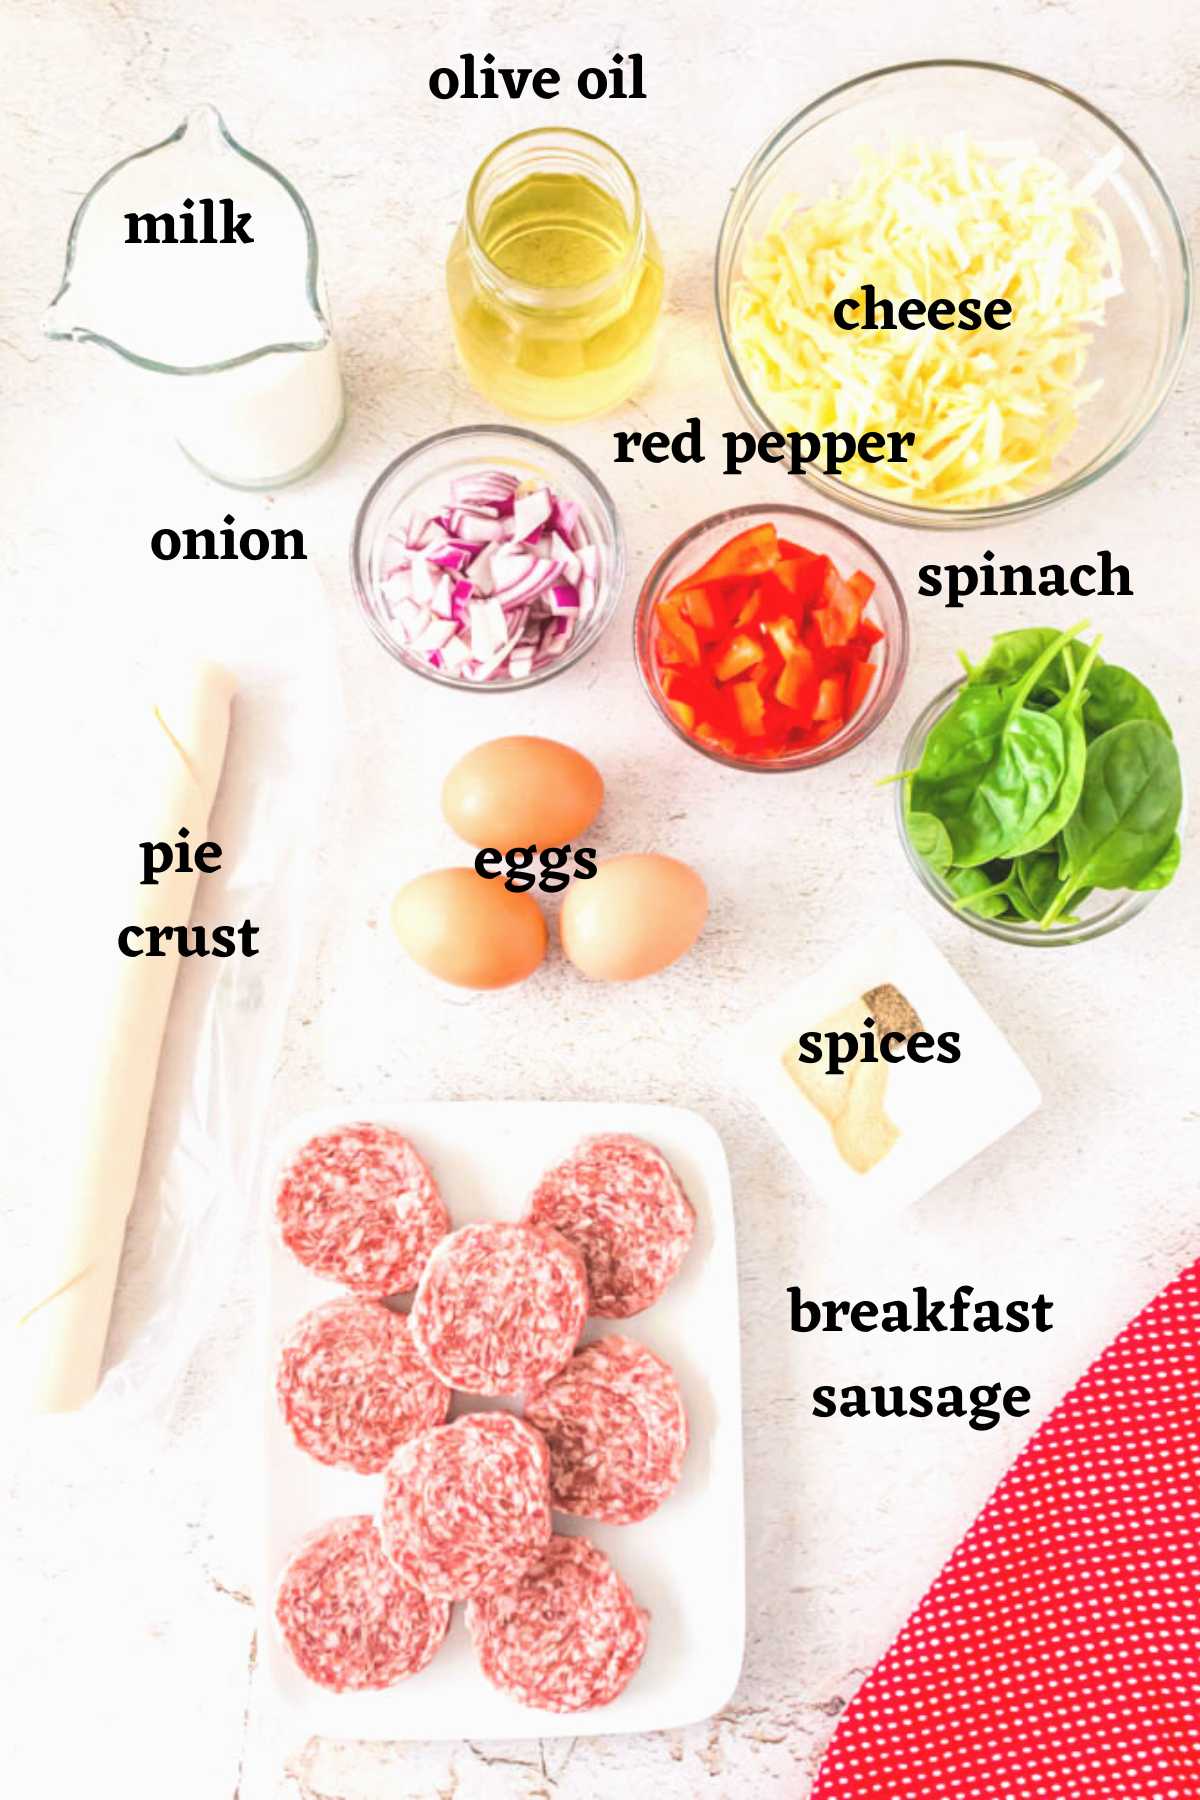 Ingredients to make this Sausage and Spinach Quiche recipe.